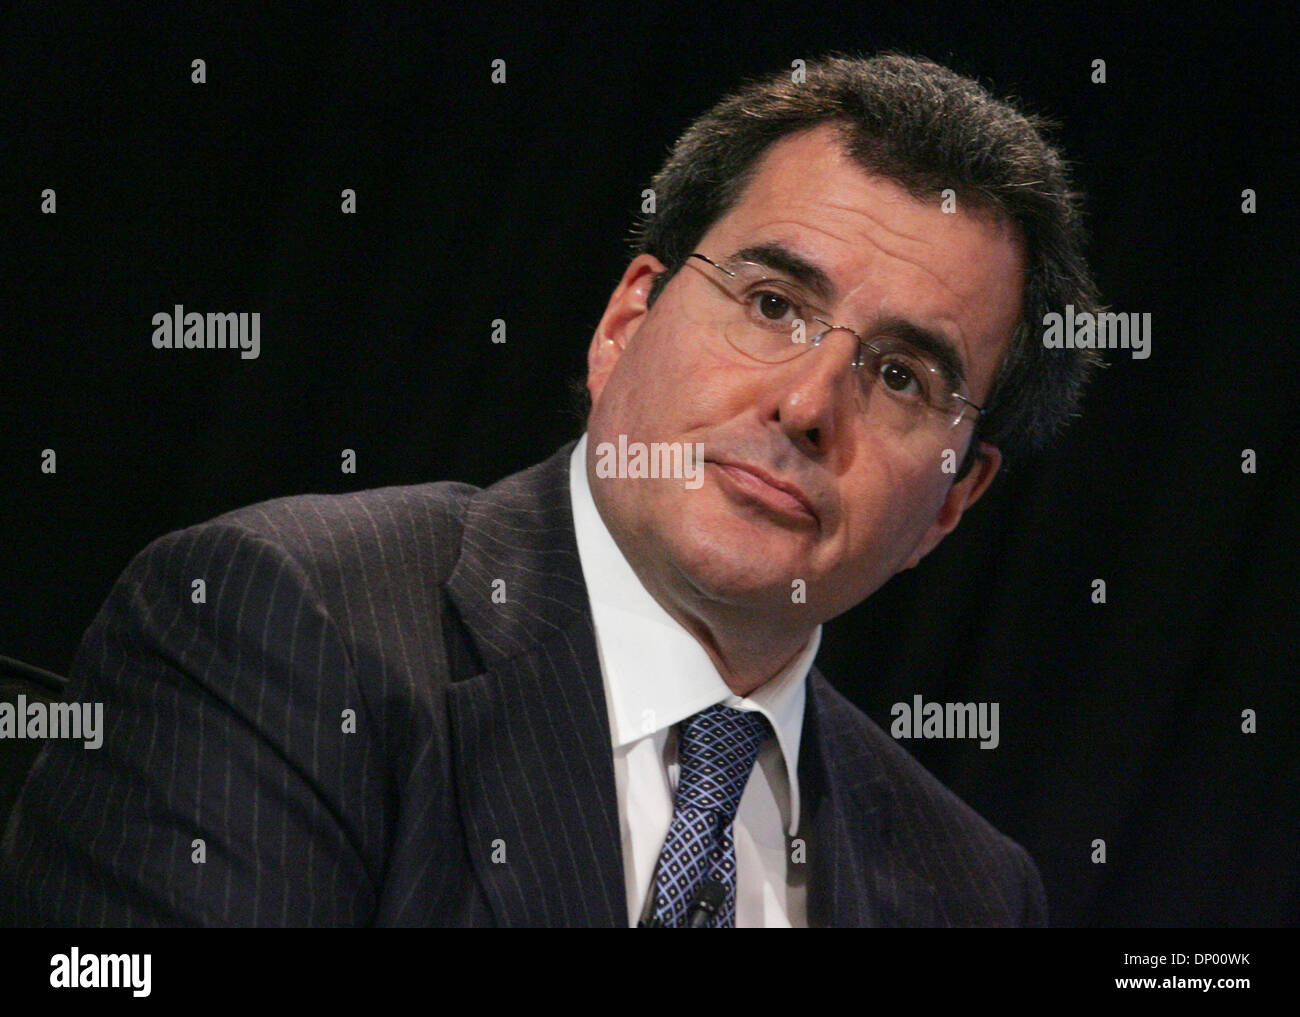 Feb 22, 2006; New York, NY, USA; President and COO  of News Corporation  PETER CHERNIN at a press coference held at the W Hotel, where it was announced that Fox will launch 'My Network TV', a new primetime program network scheduled to debut this fall. Mandatory Credit: Photo by Nancy Kaszerman/ZUMA Press. (©) Copyright 2006 by Nancy Kaszerman Stock Photo